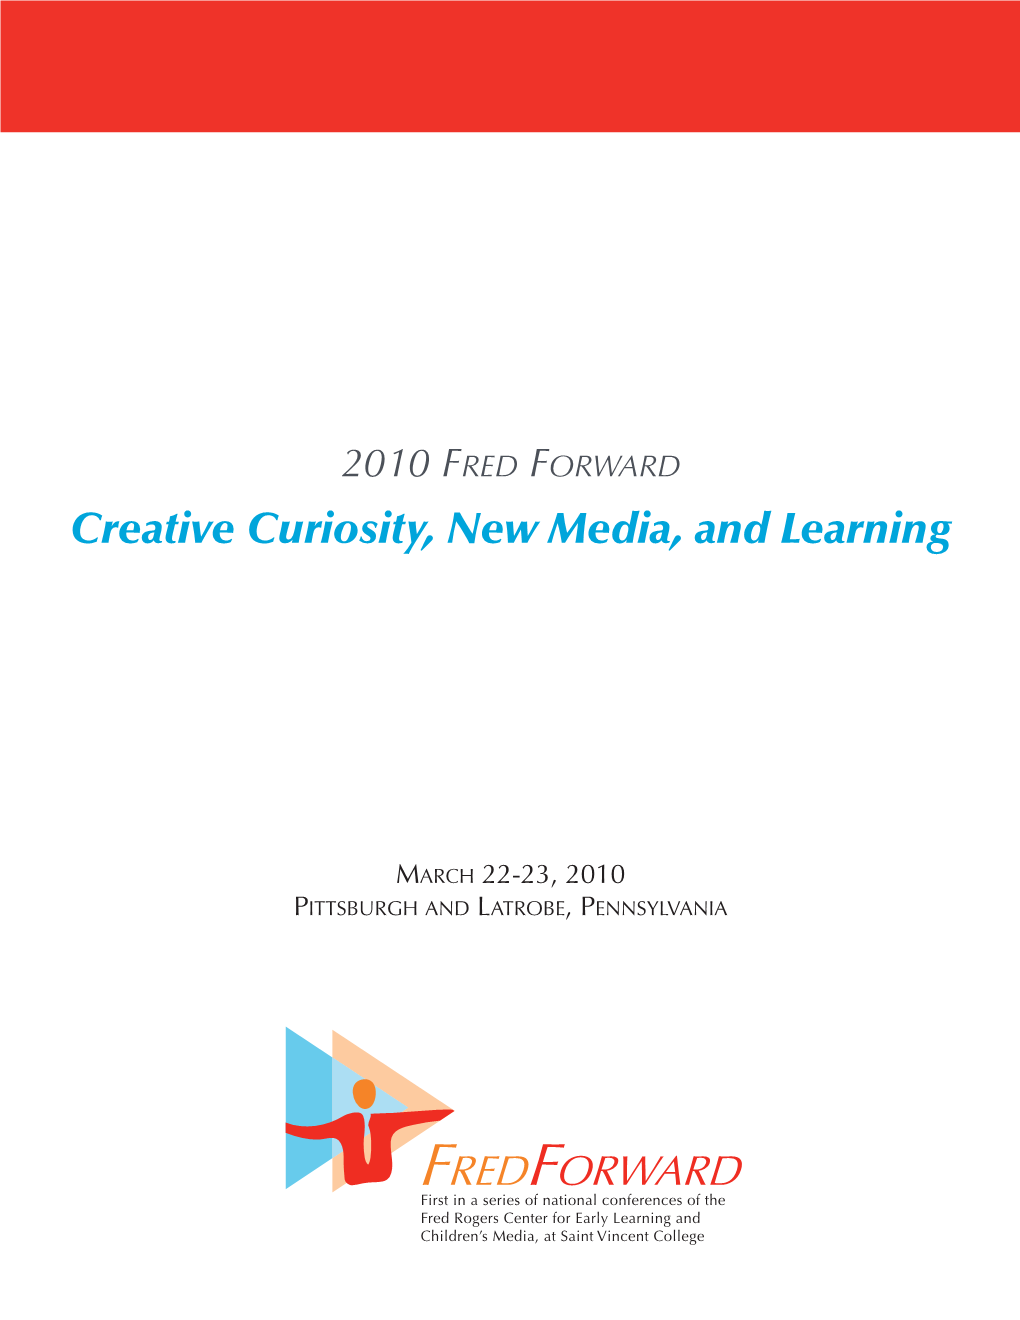 Creative Curiosity, New Media, and Learning